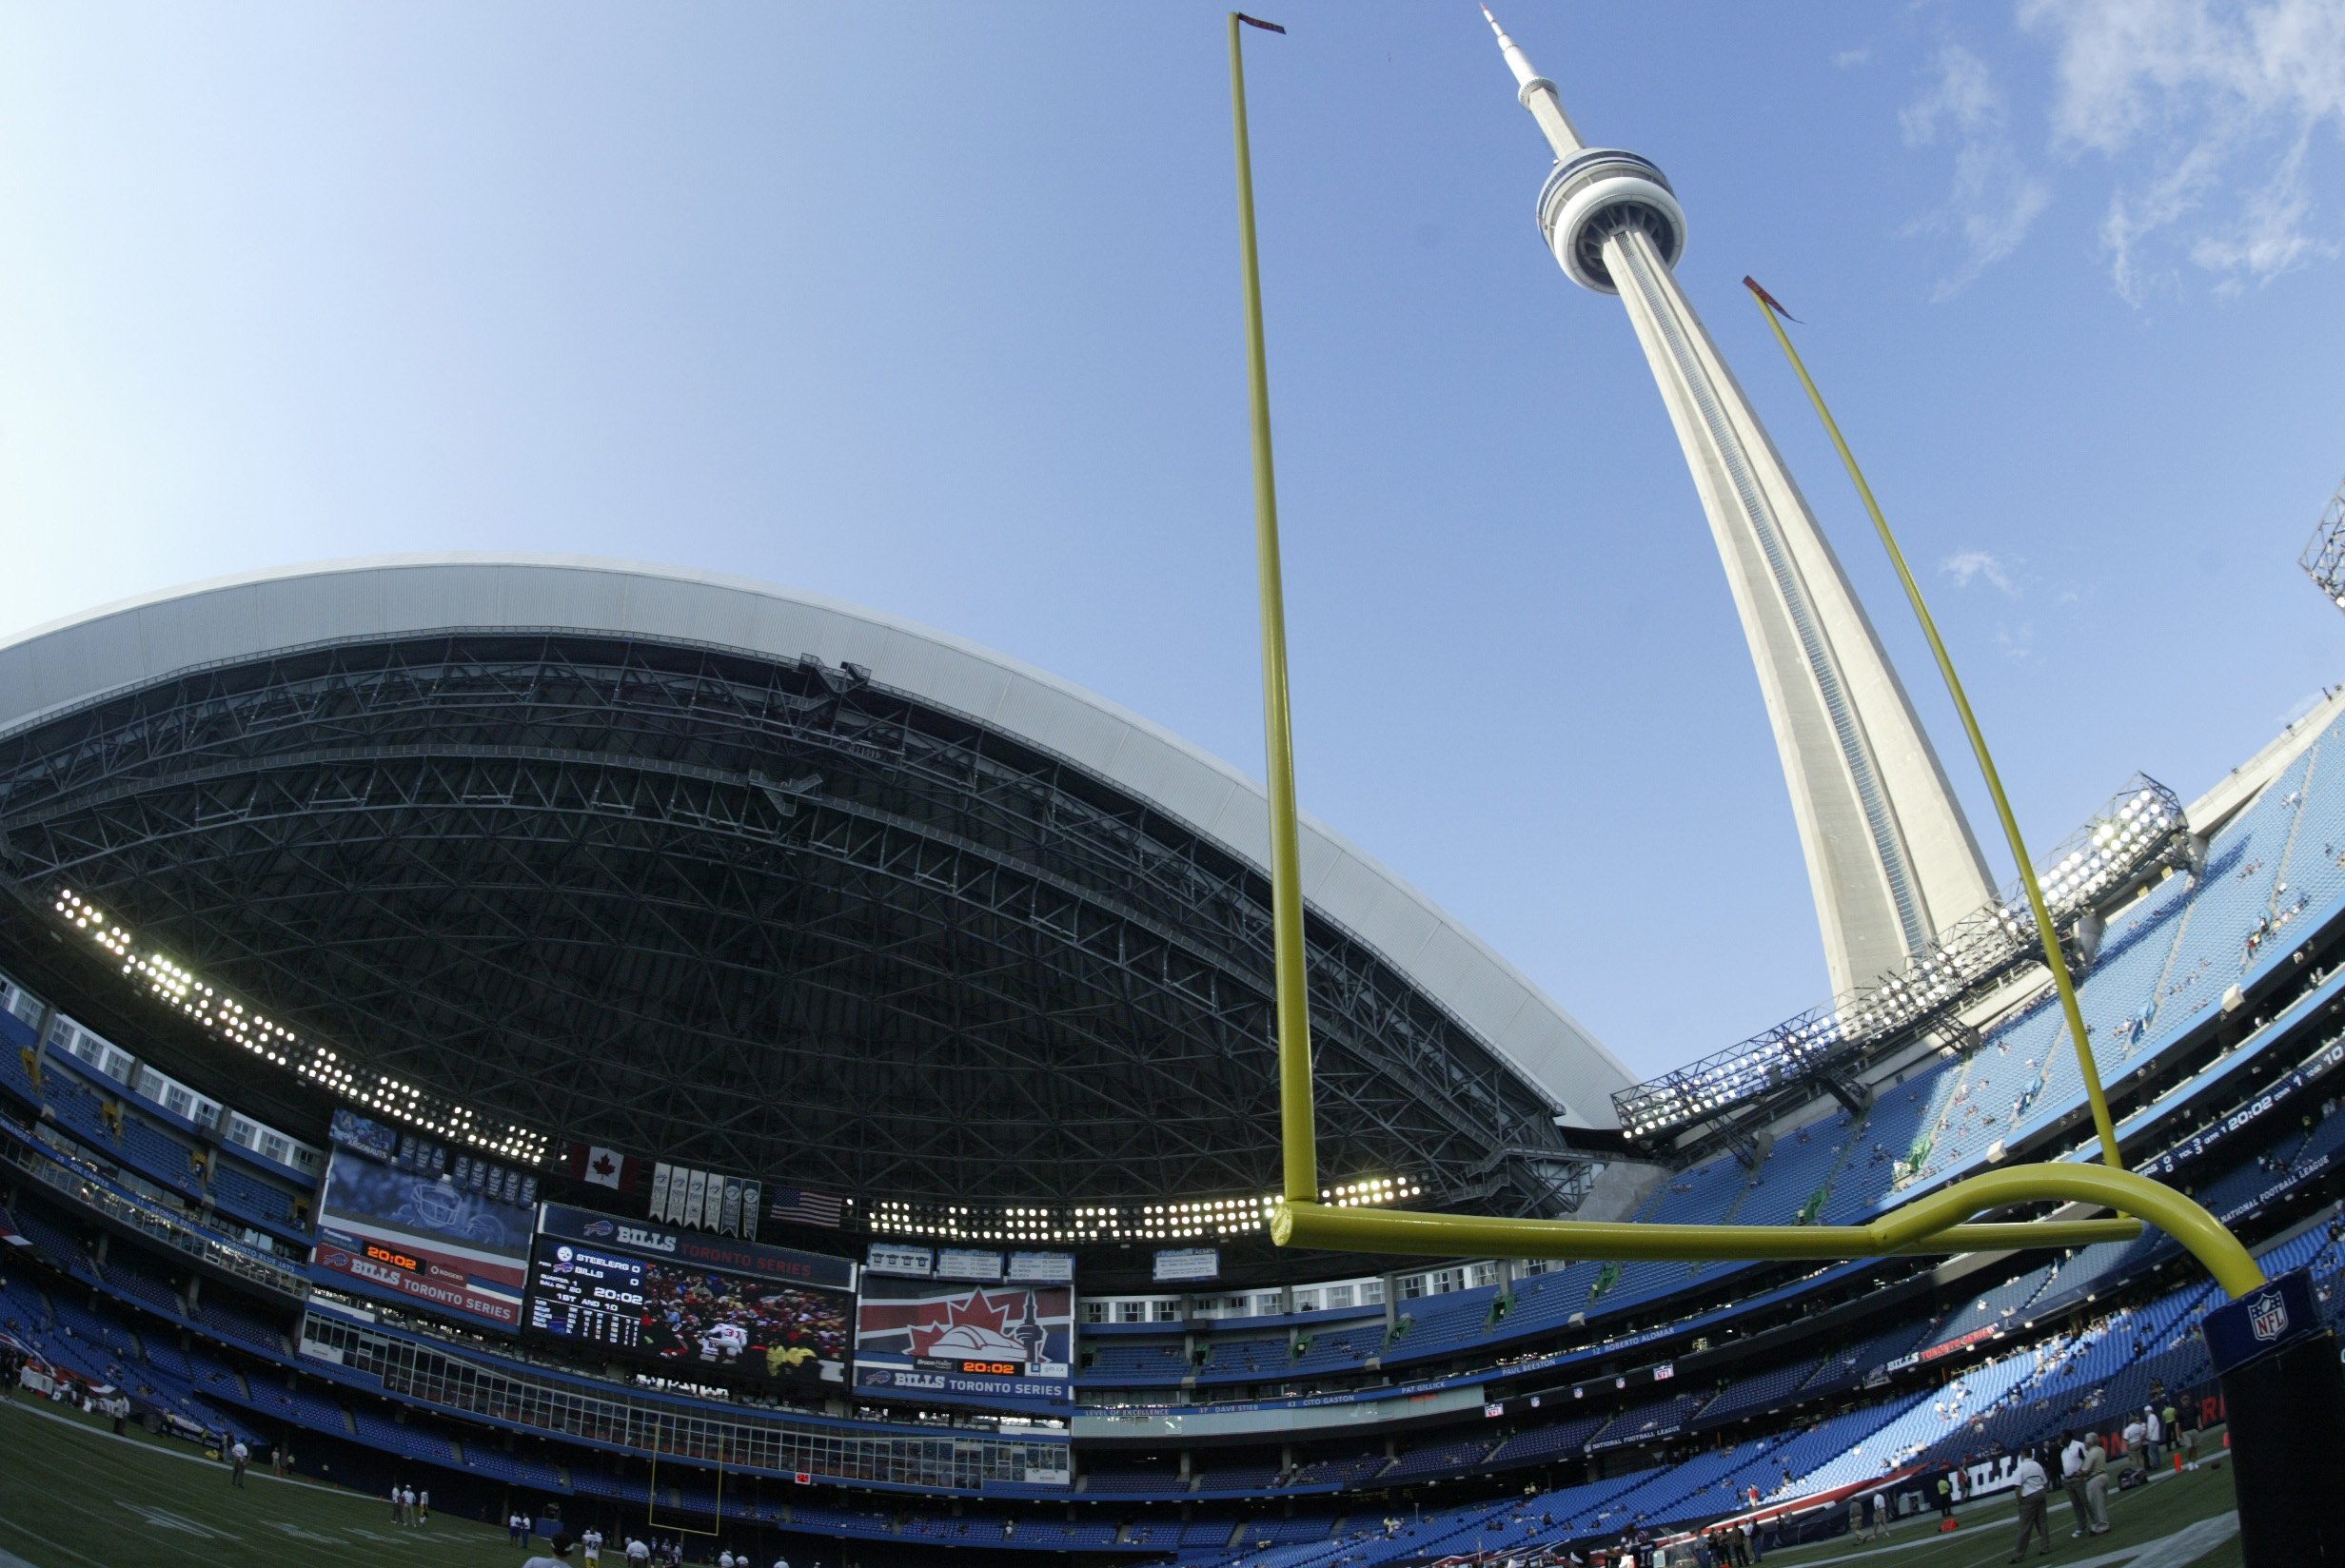 TORONTO - AUGUST 14:  General view of Rogers Centre in Toronto, Canada with the roof open during the NFL preseason game between the Pittsburgh Steelers and the Buffalo Bills on August 14, 2008.  (Photo by Rick Stewart/Getty Images)